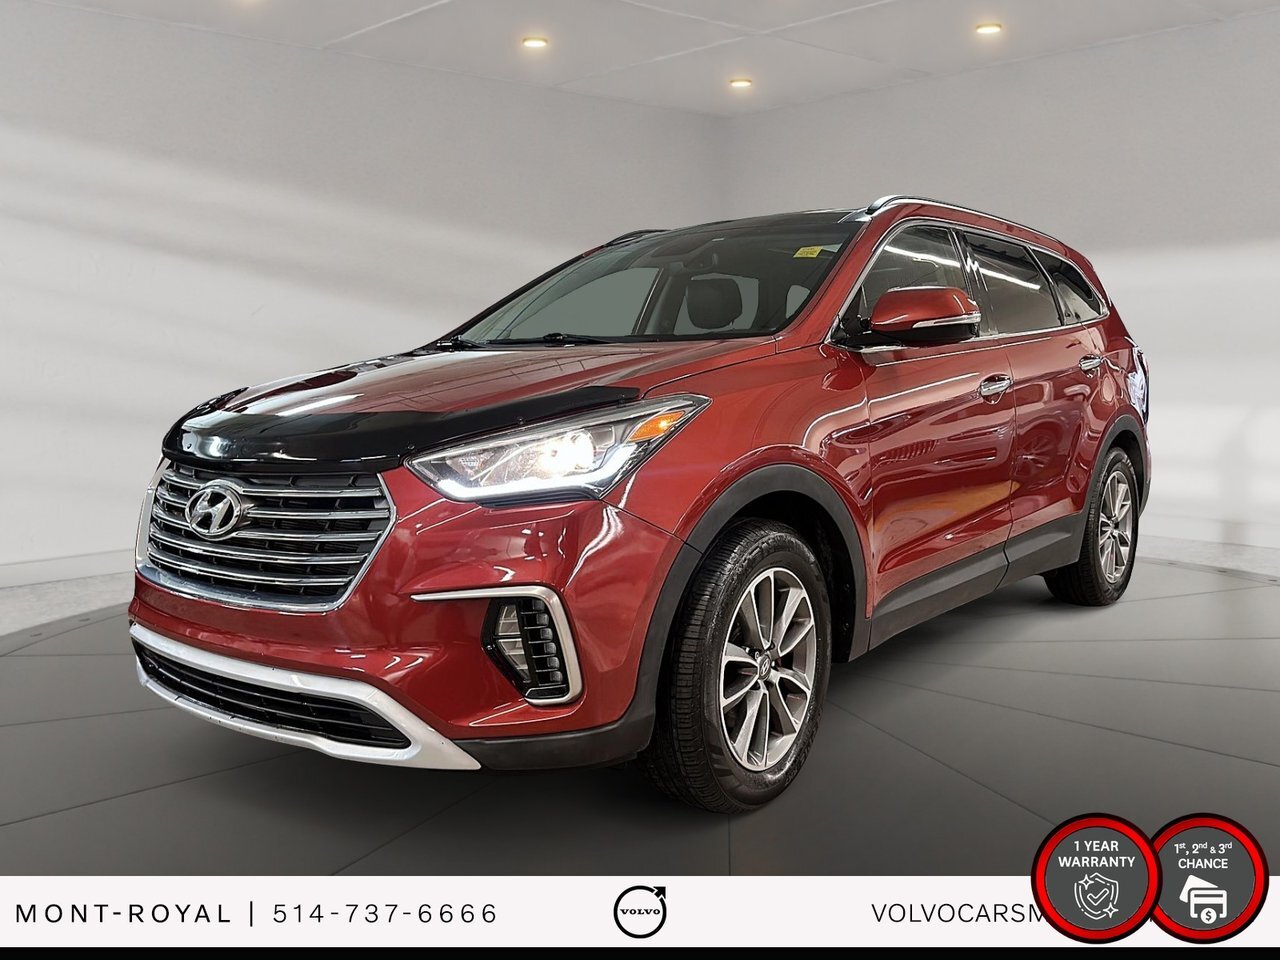 2017 Hyundai Santa Fe XL Luxury Interest rates starting from 7.99% / Taux d